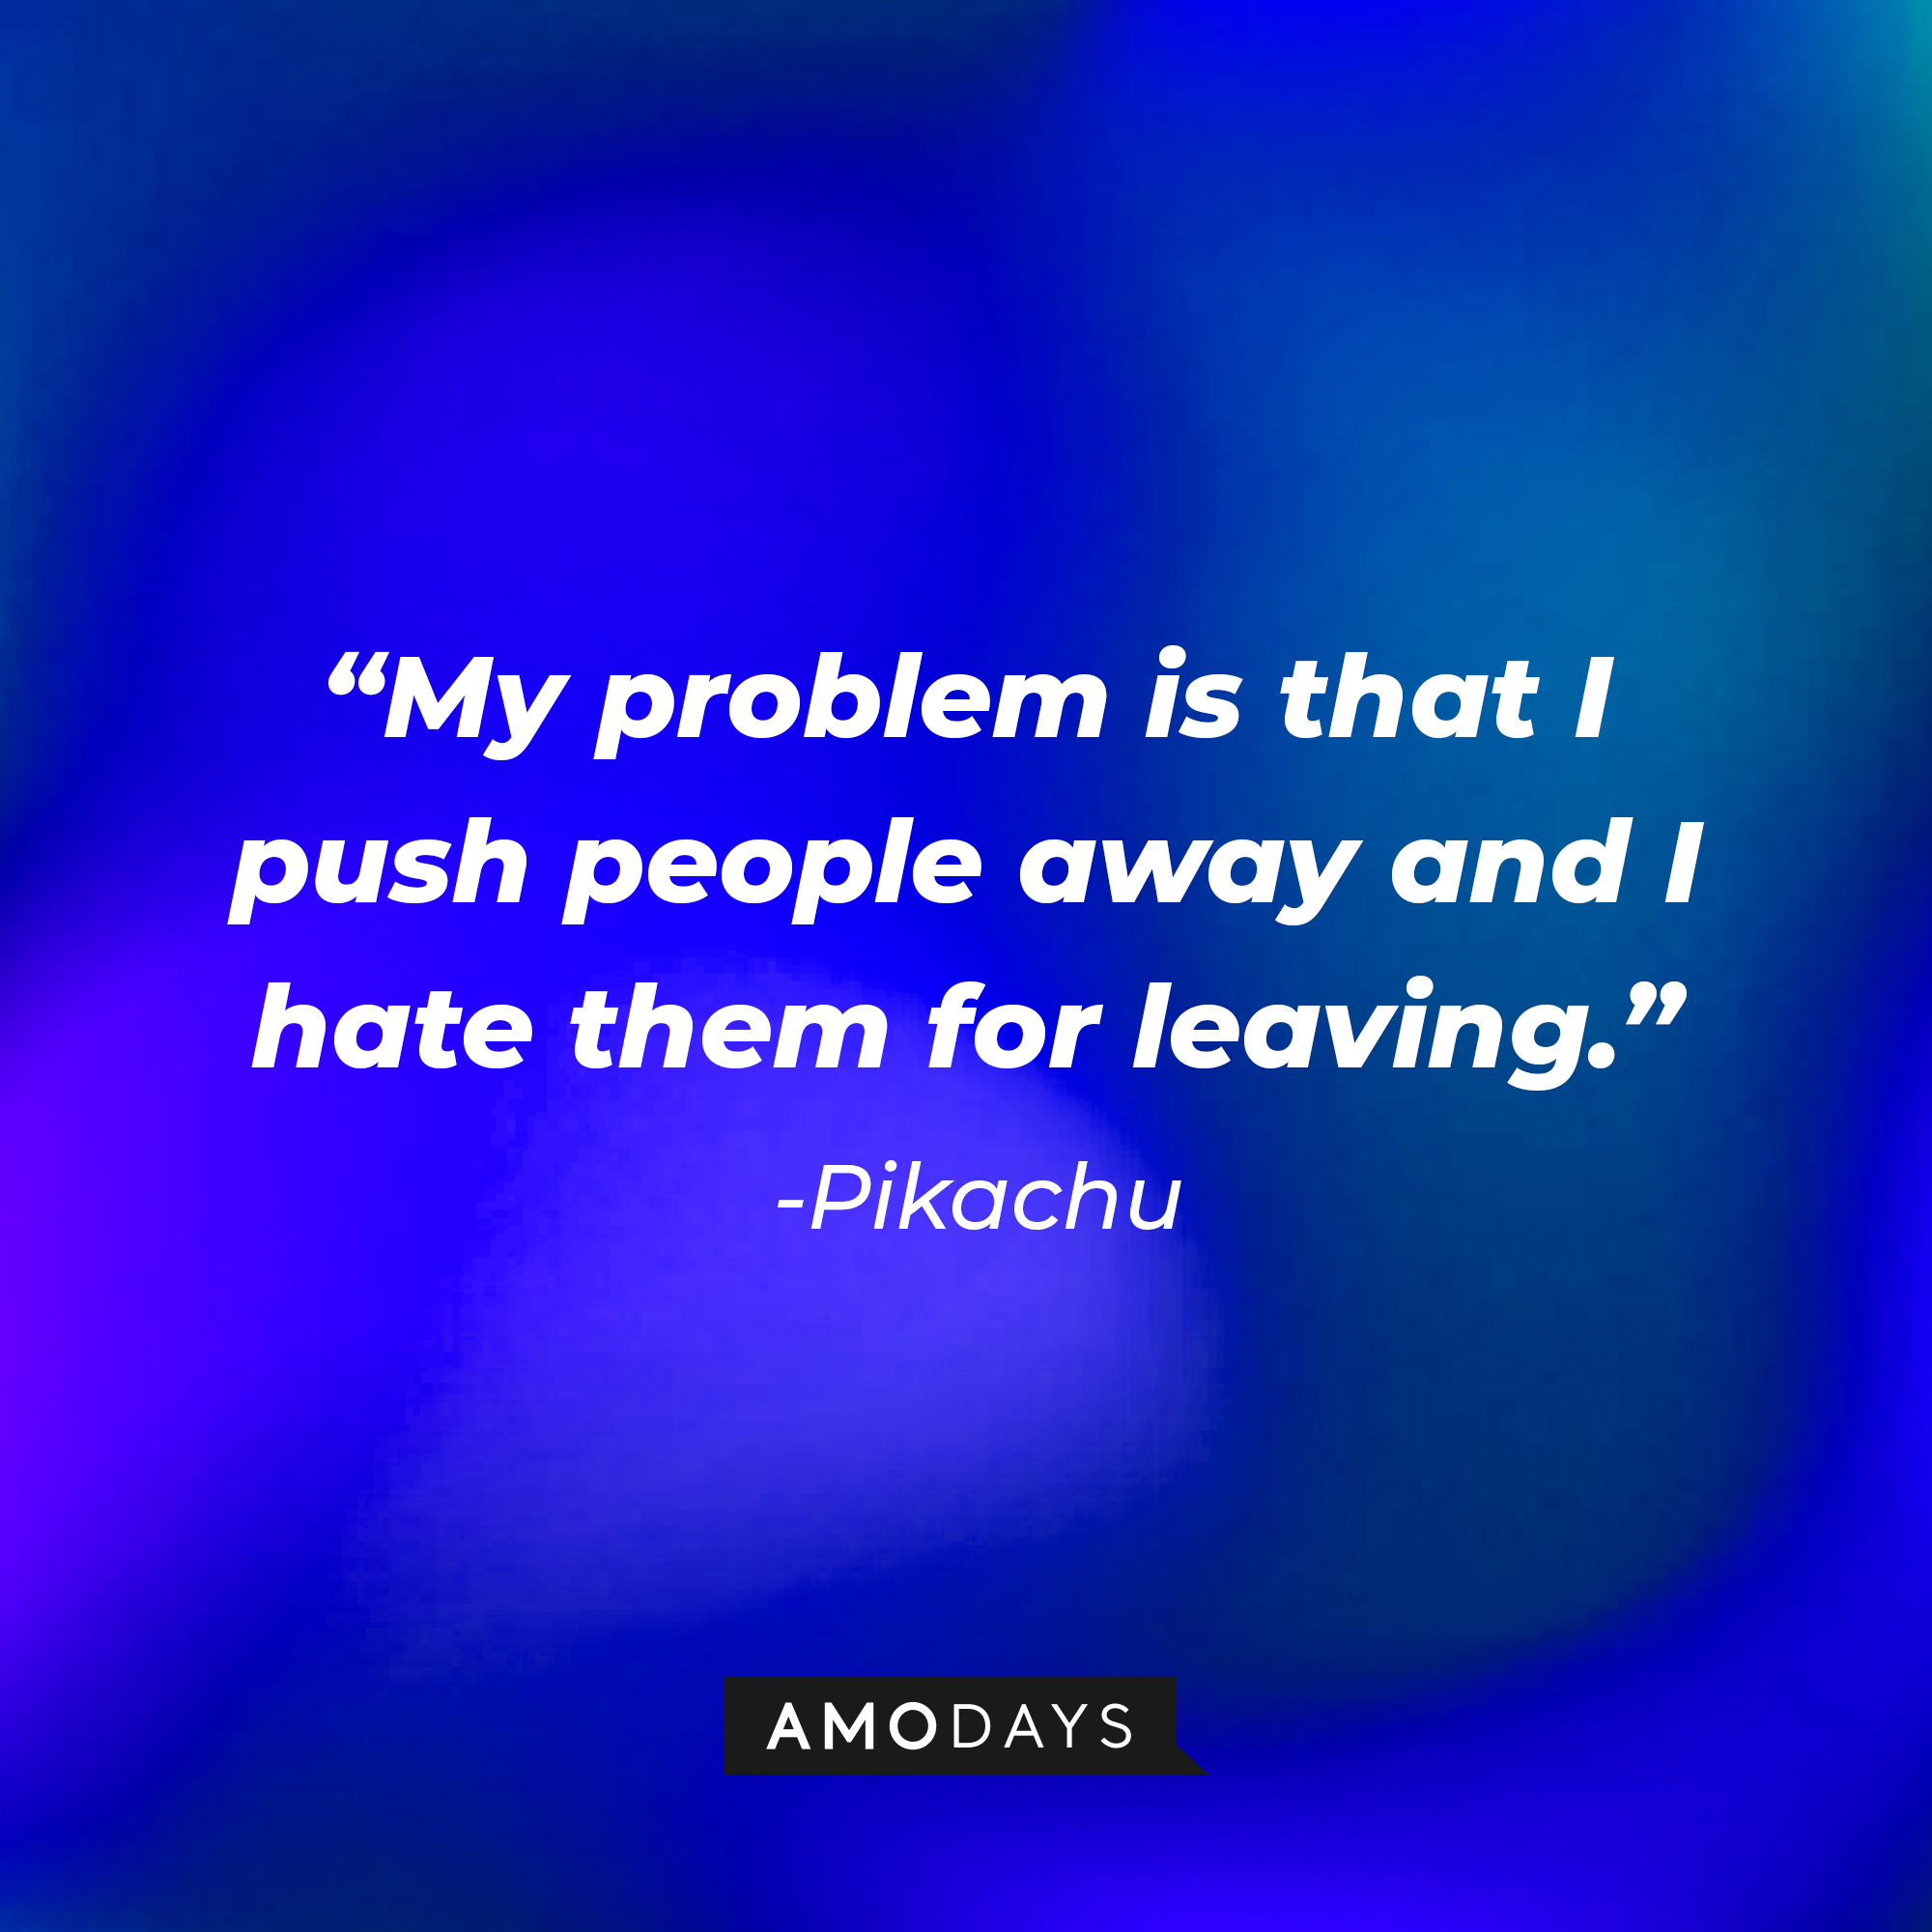 Pikachu's quote: "My problem is that I push people away and I hate them for leaving." | Source: AmoDays